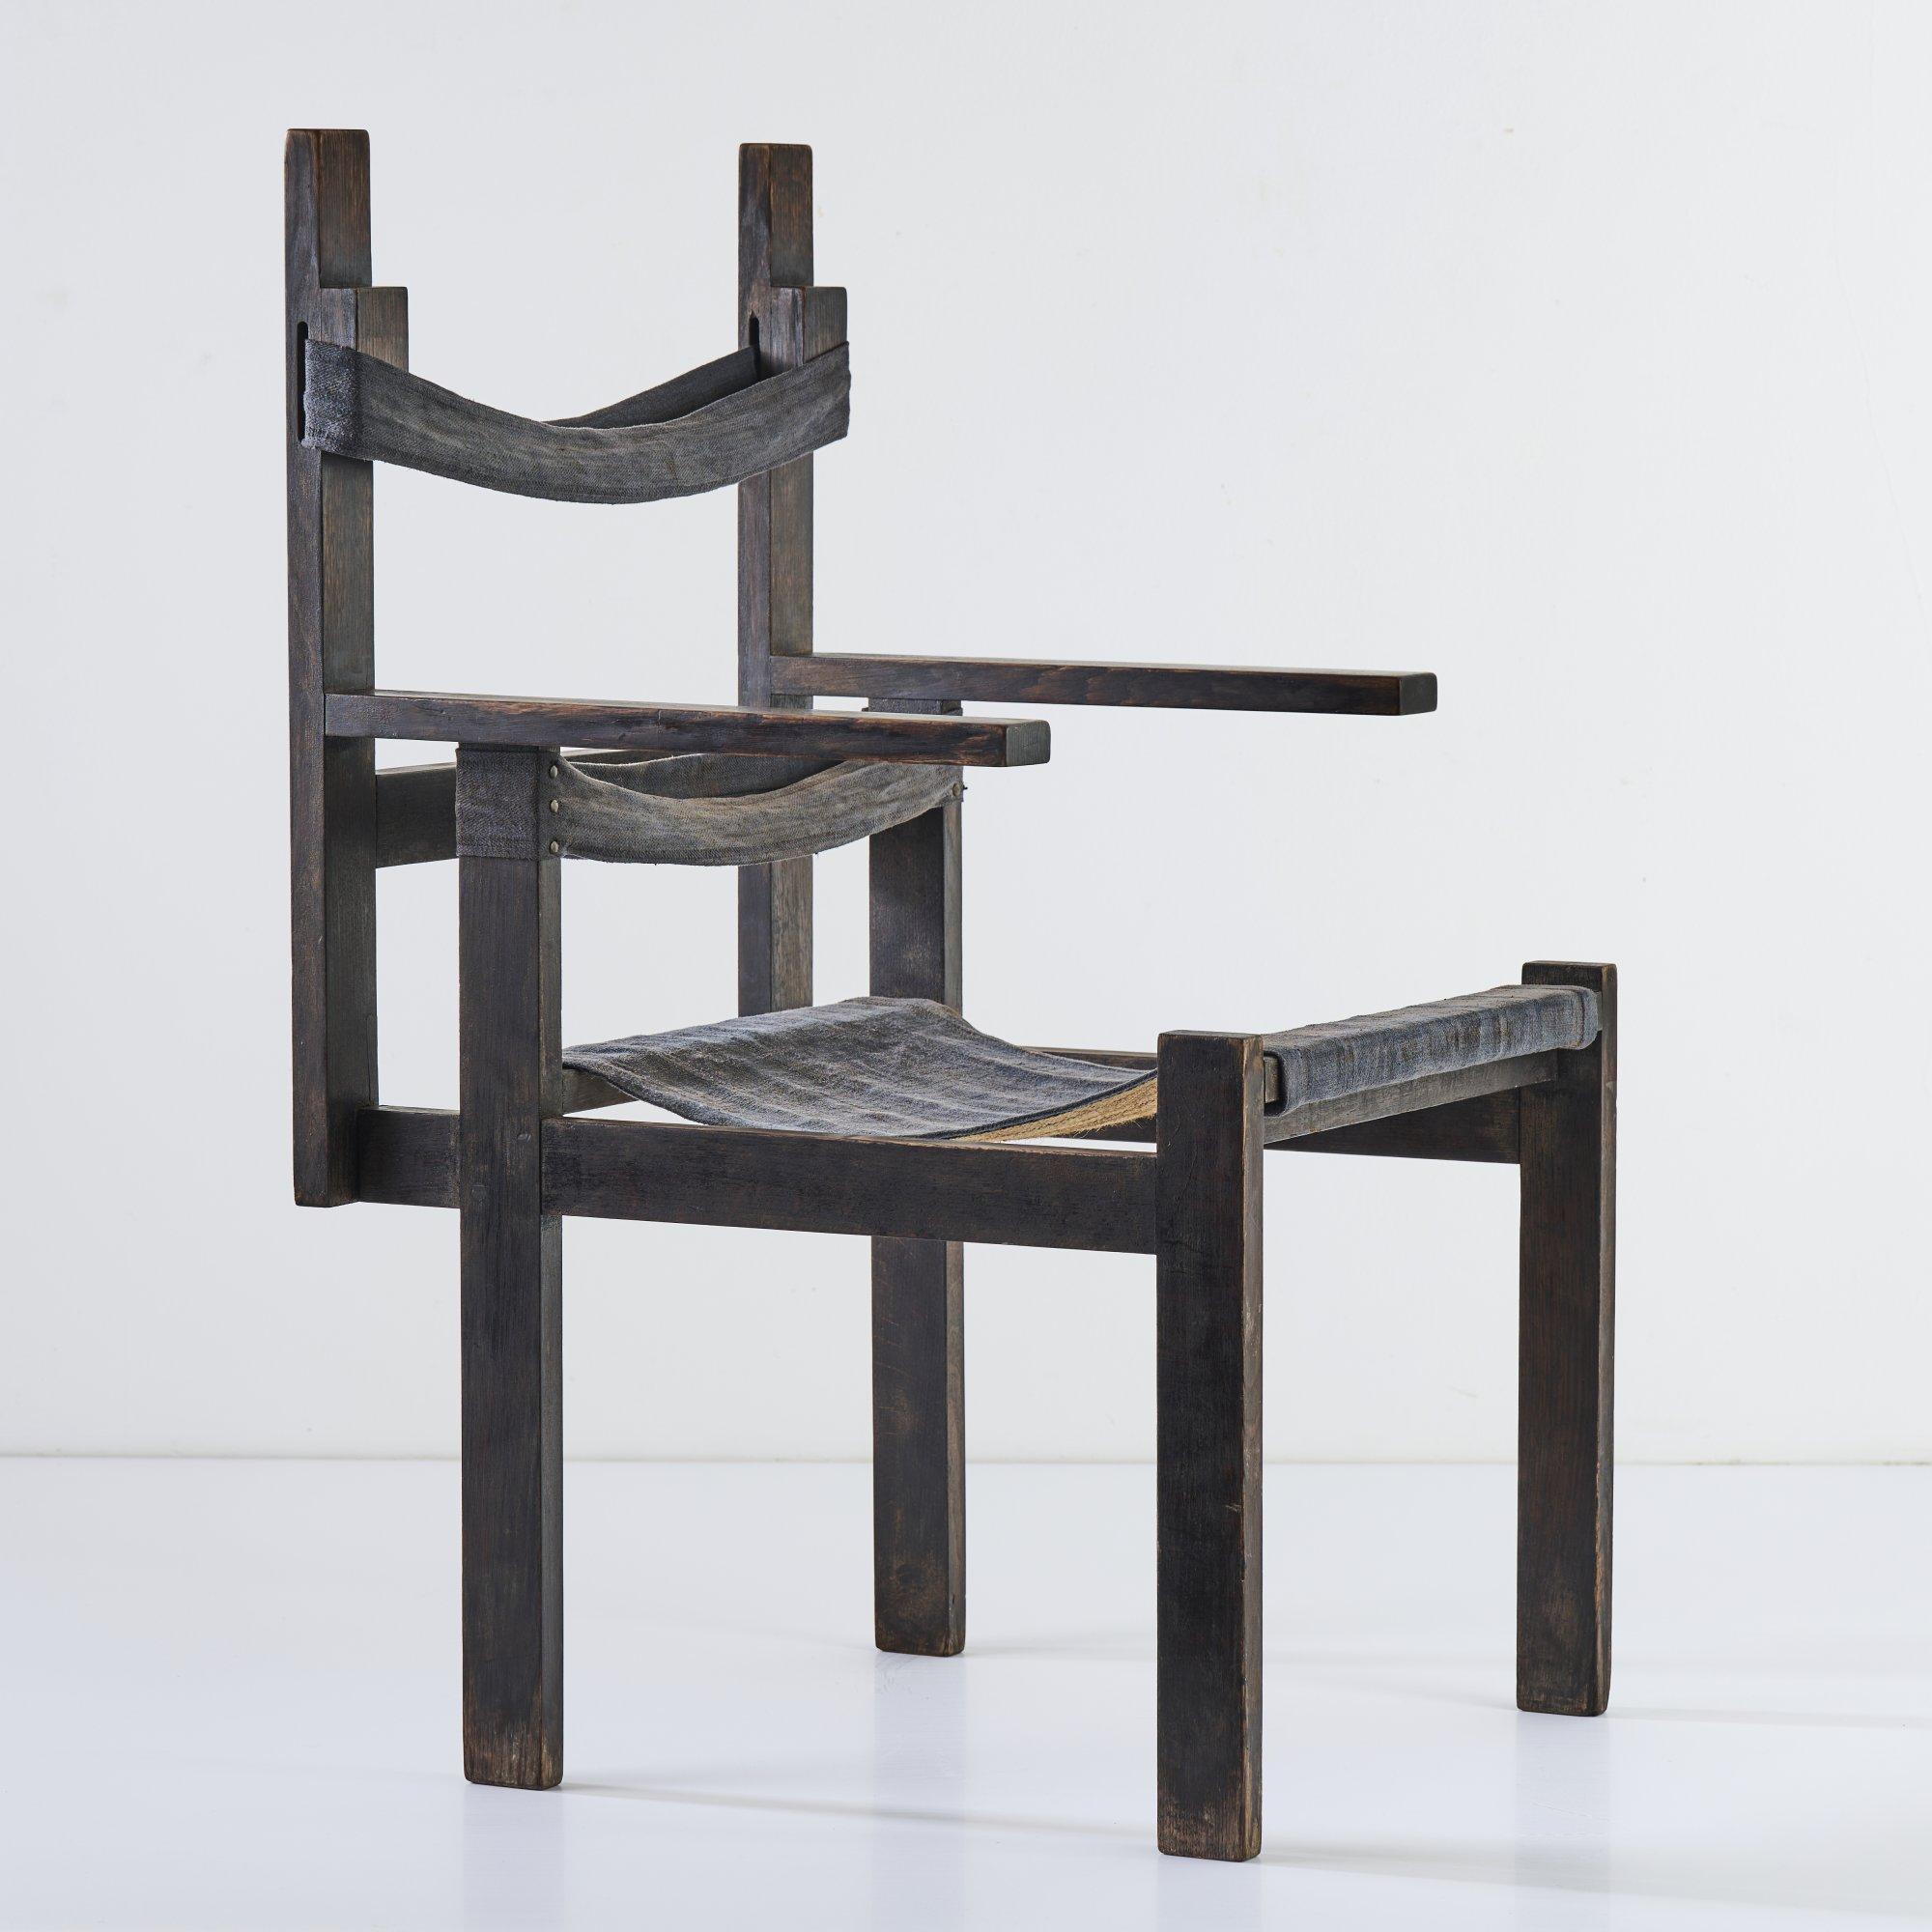 Wooden-slat chair called 